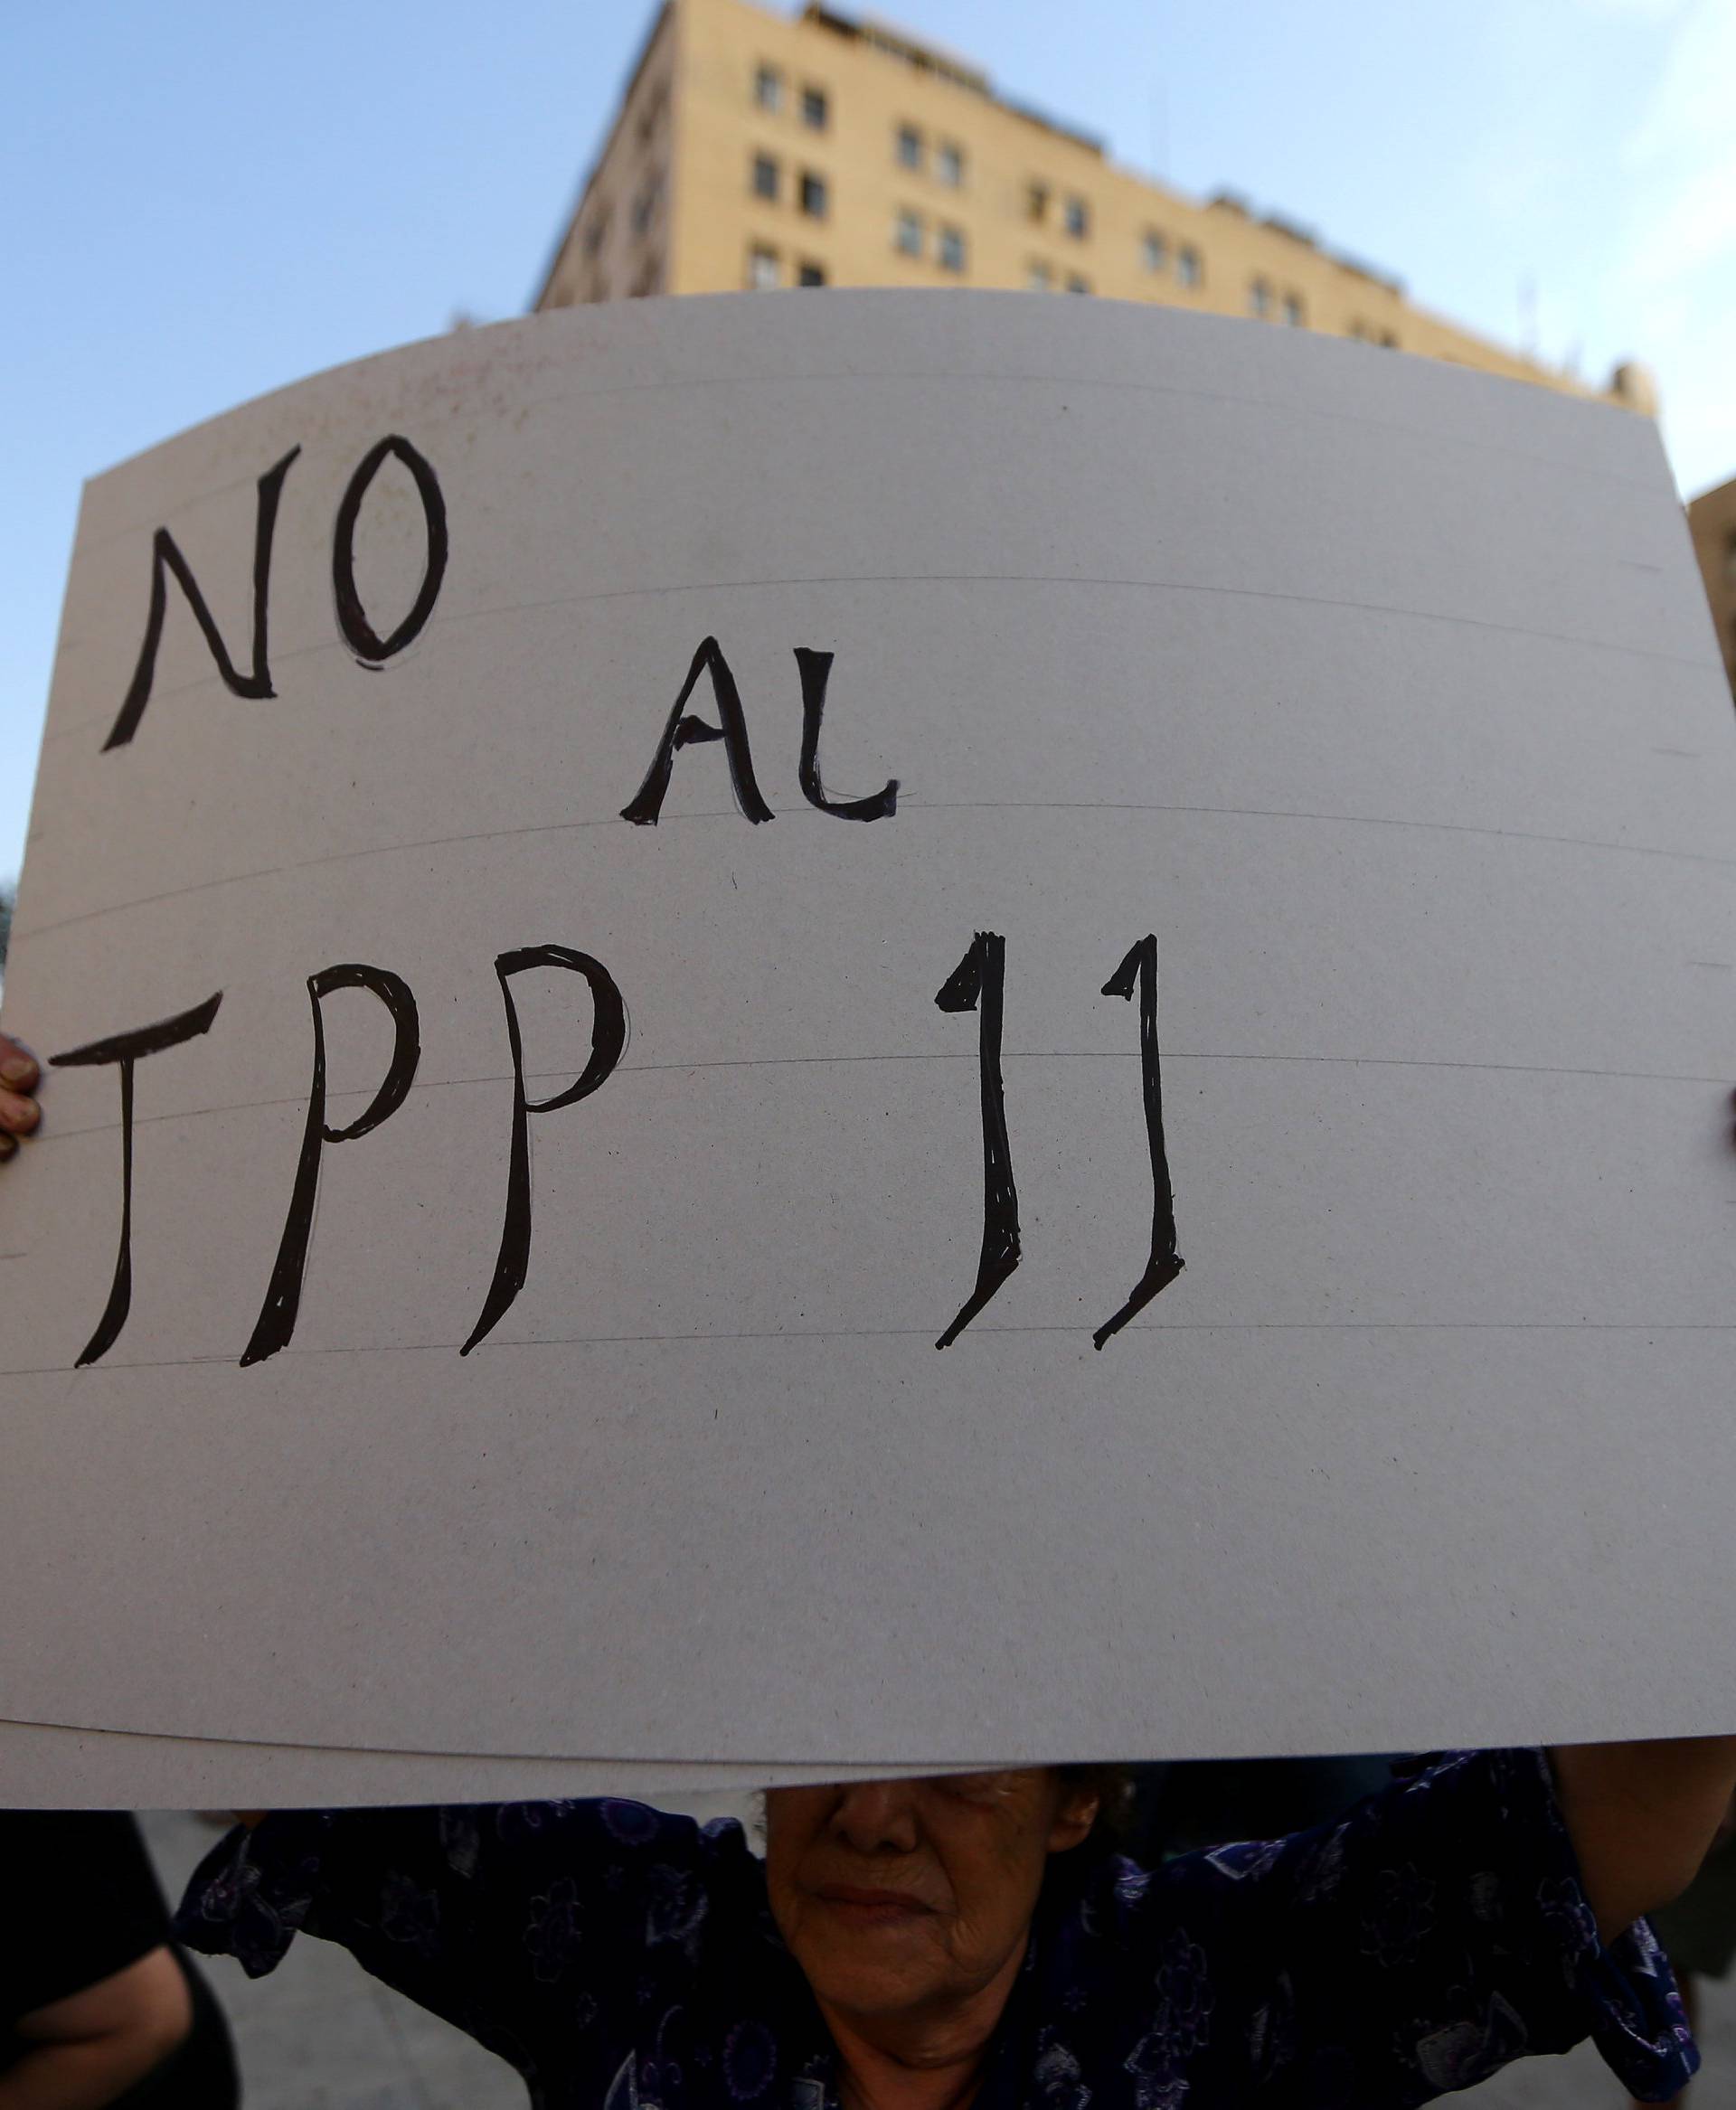 A demonstrator holds up a sign reading "Not to TPP" during rally against the Trans-Pacific Partnership (TPP) trade deal in Santiago